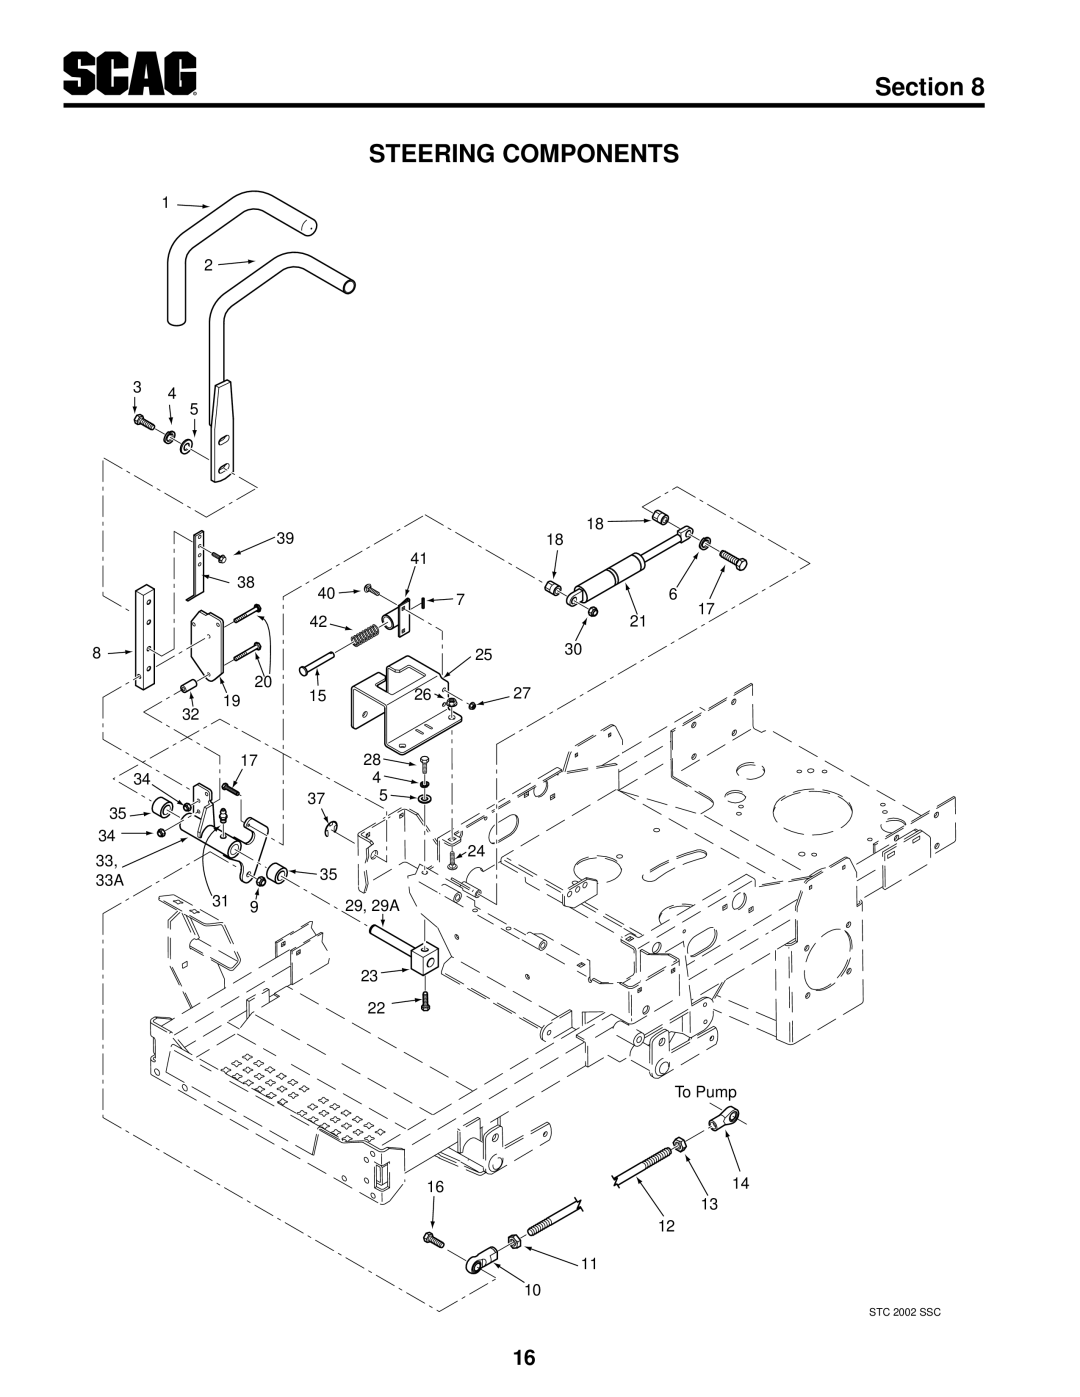 Scag Power Equipment SMWC-52V, SMWC-61V, SMTC-48V manual Steering Components, Section, 29, 29A, To Pump, STC 2002 SSC 